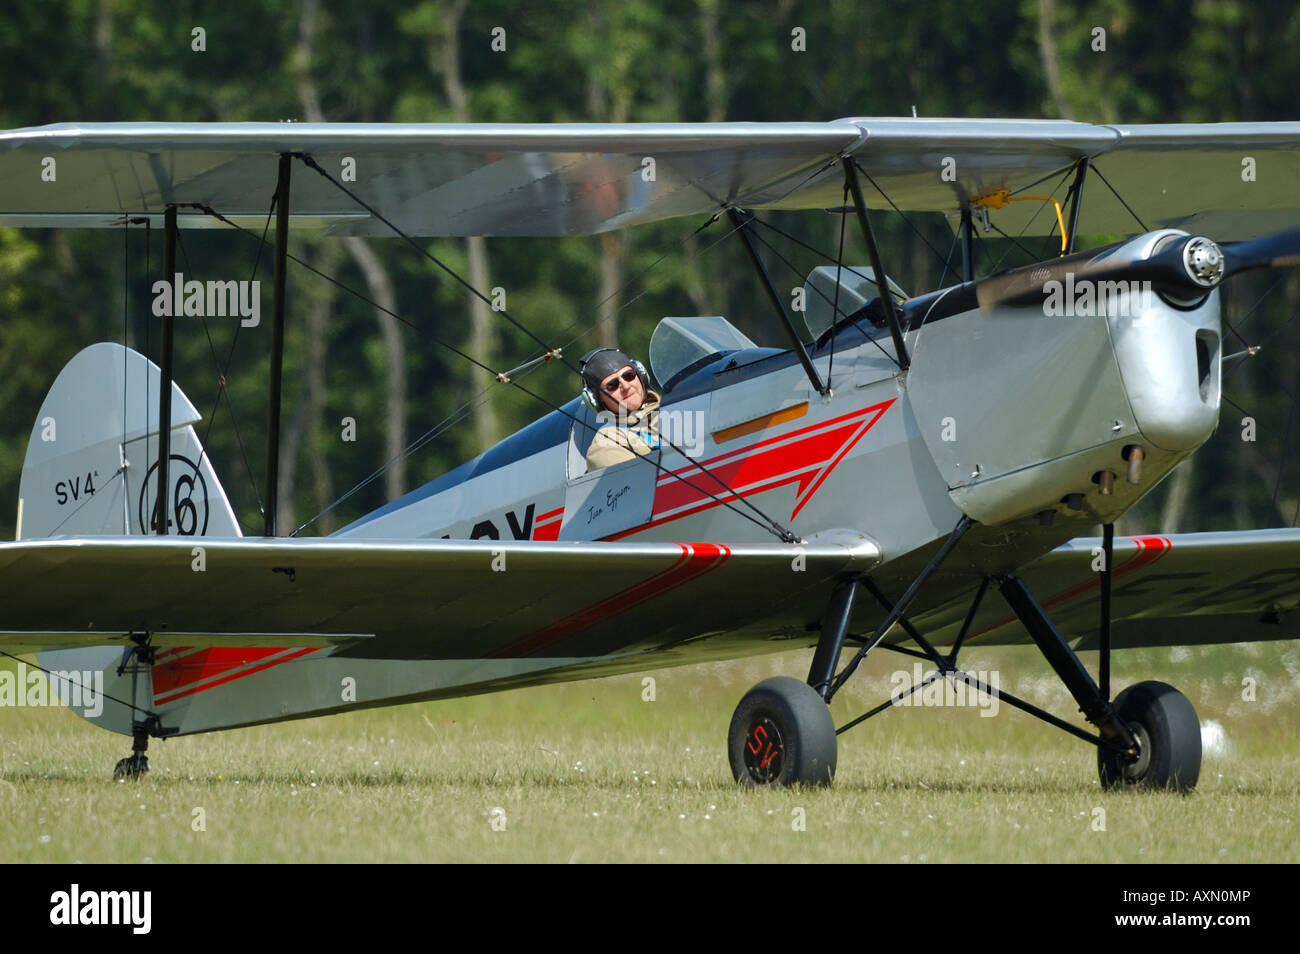 Old french trainer biplane Stampe SV-4a, french vintage air show, La Ferte  Alais, France Stock Photo - Alamy